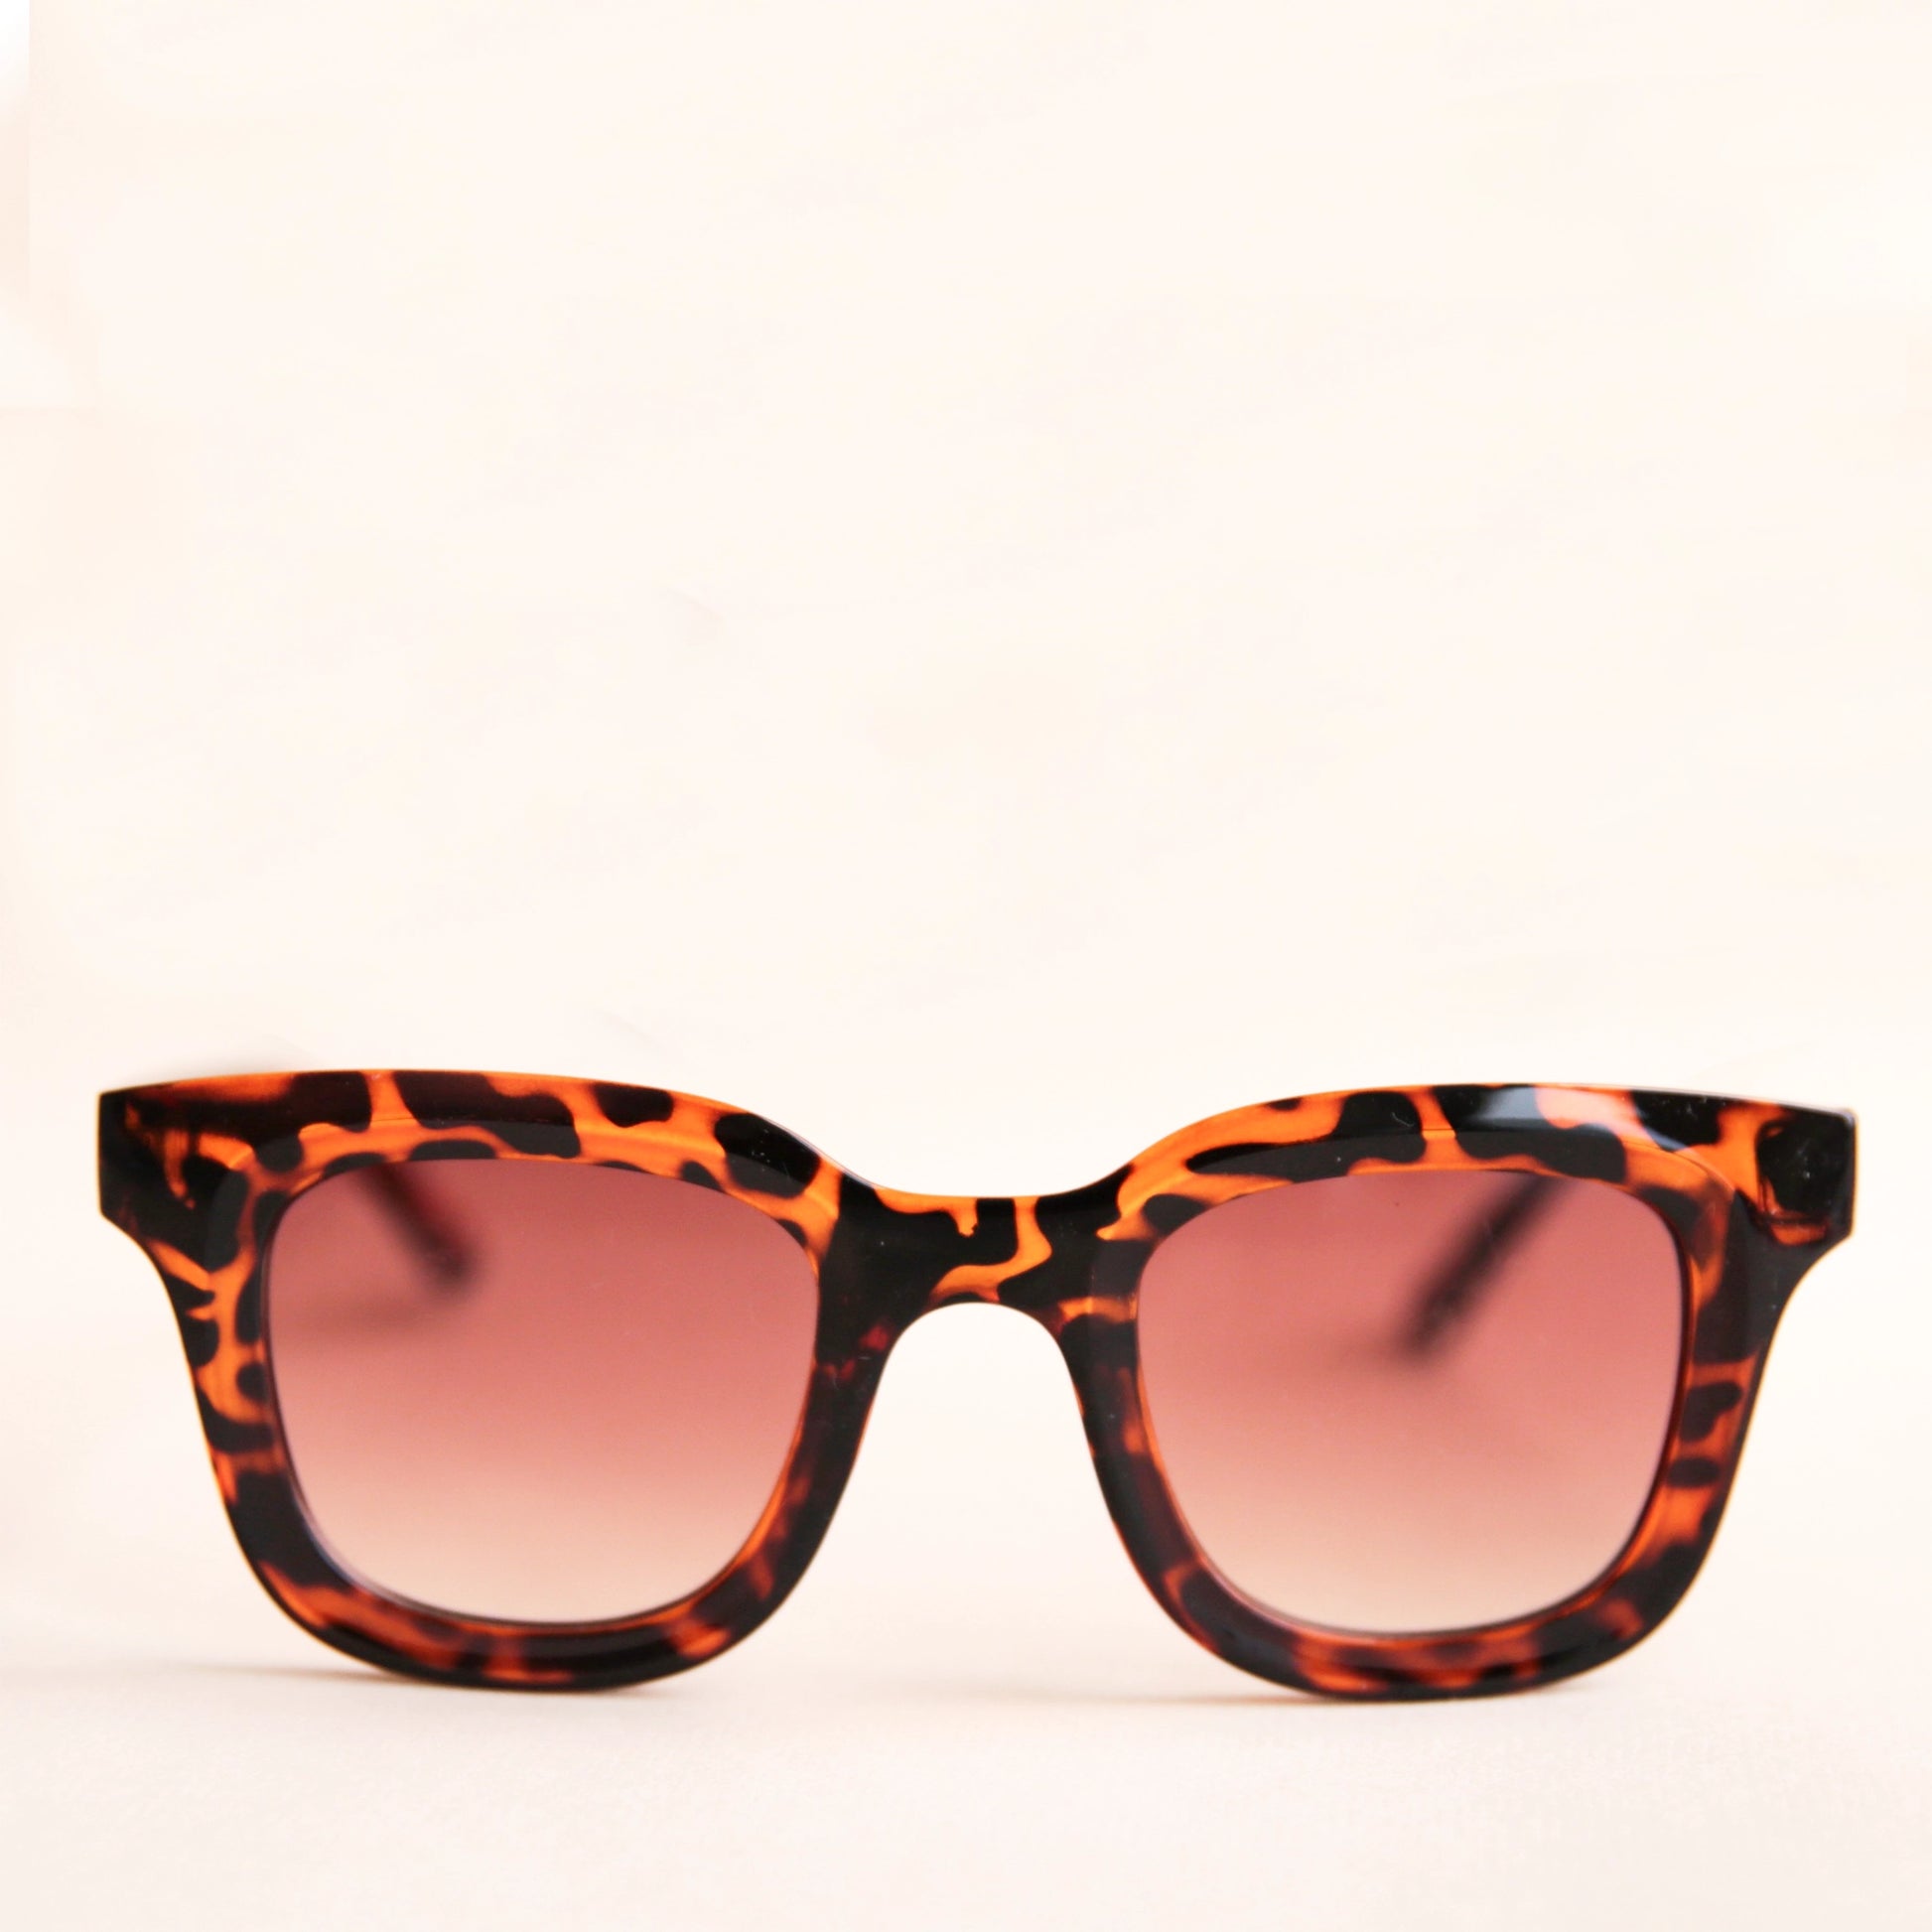 On a white background is a square pair of sunglasses with a brown and black tortoise pattern and a light brown lens.